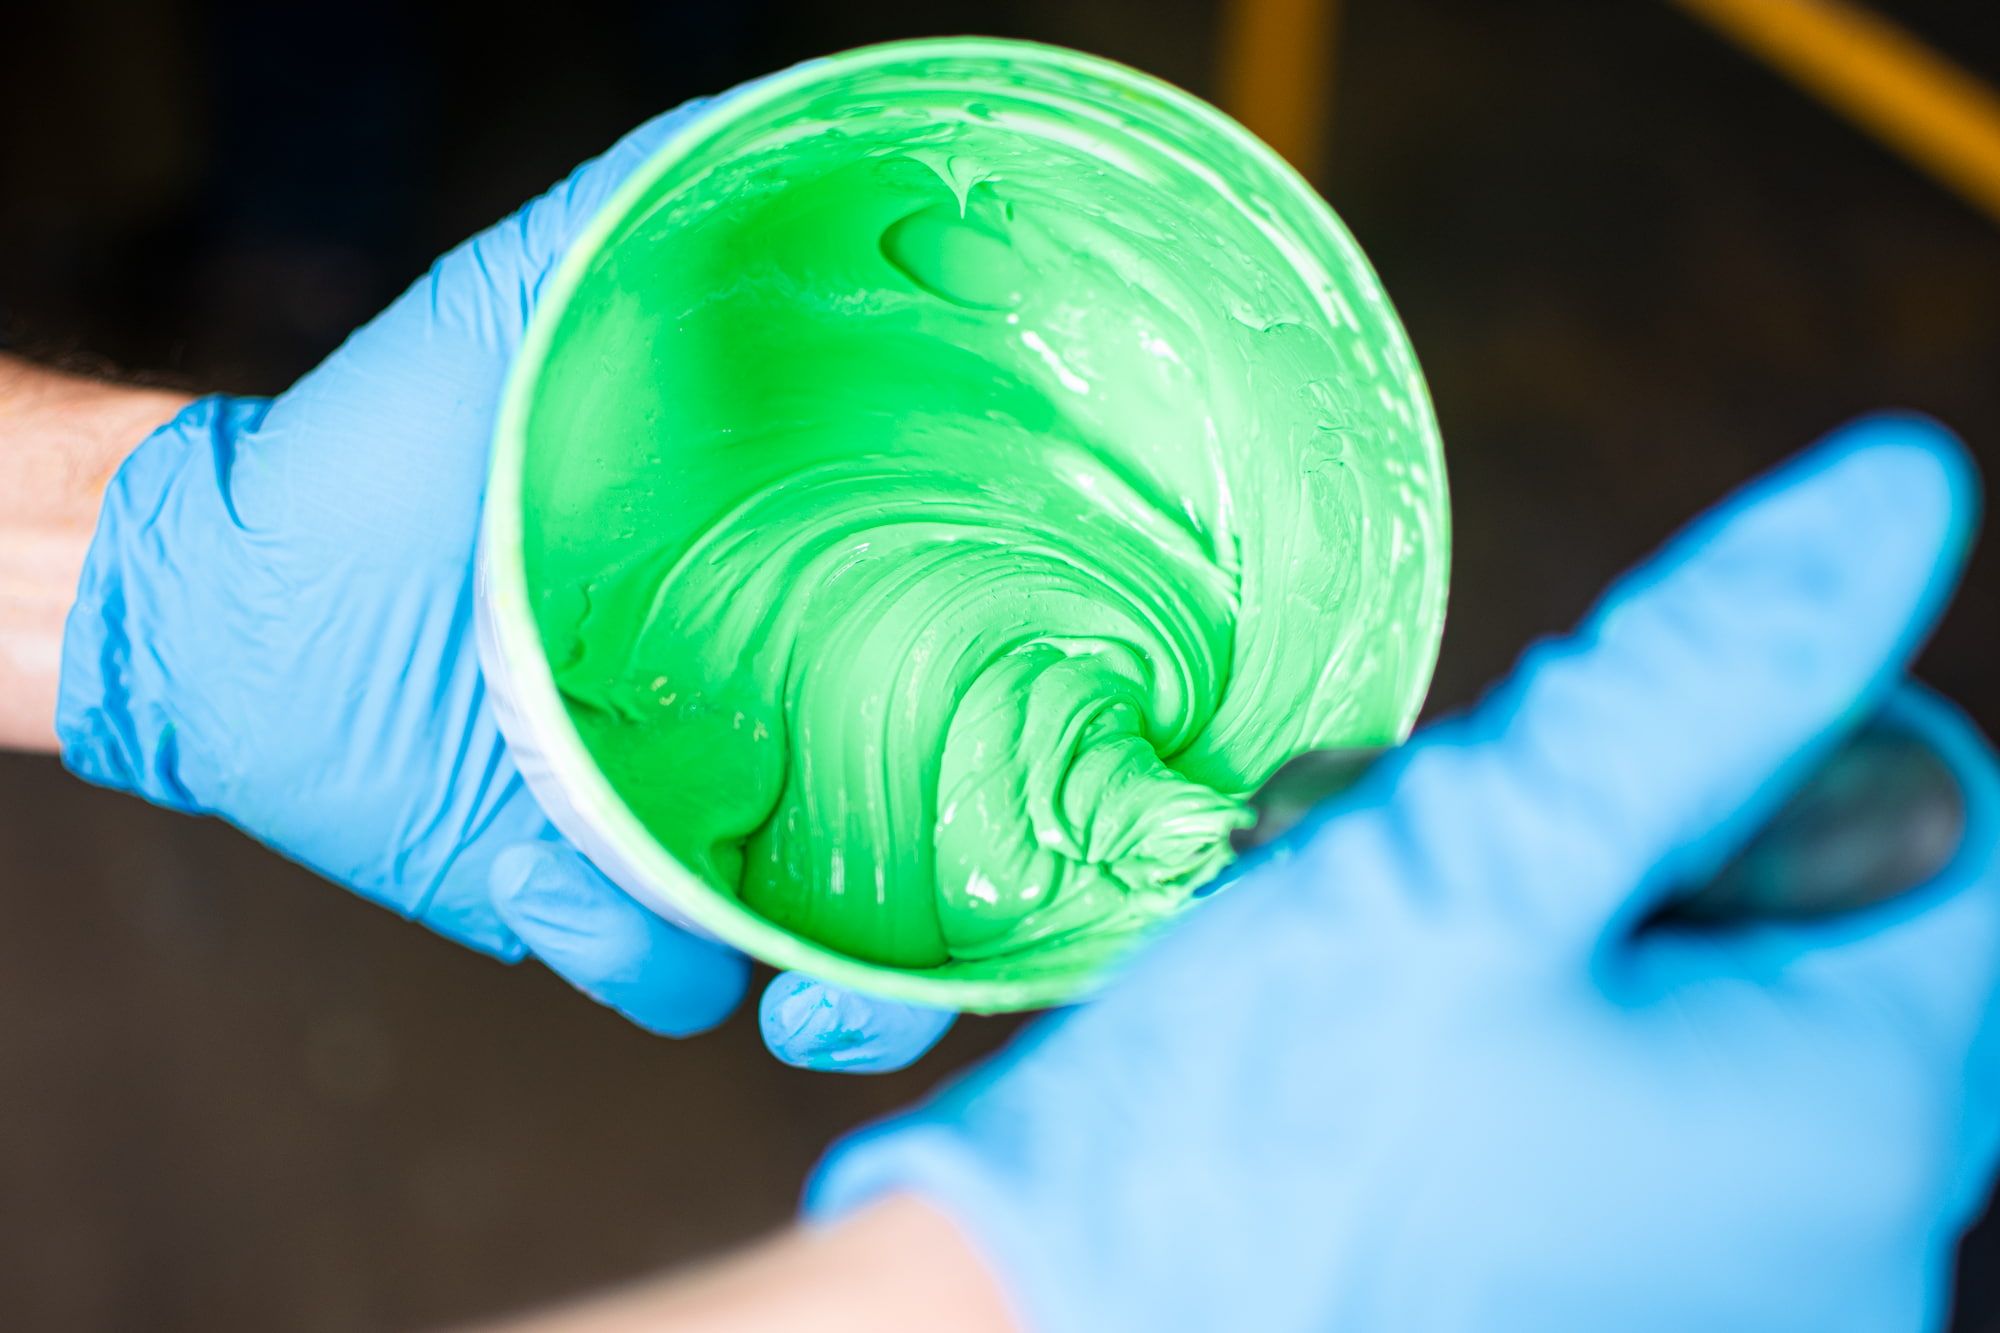 Inks are mixed by hand at UberPrints. Pictured is a close up shot of the ink in the container being swirled around to mix the ink to perfection.